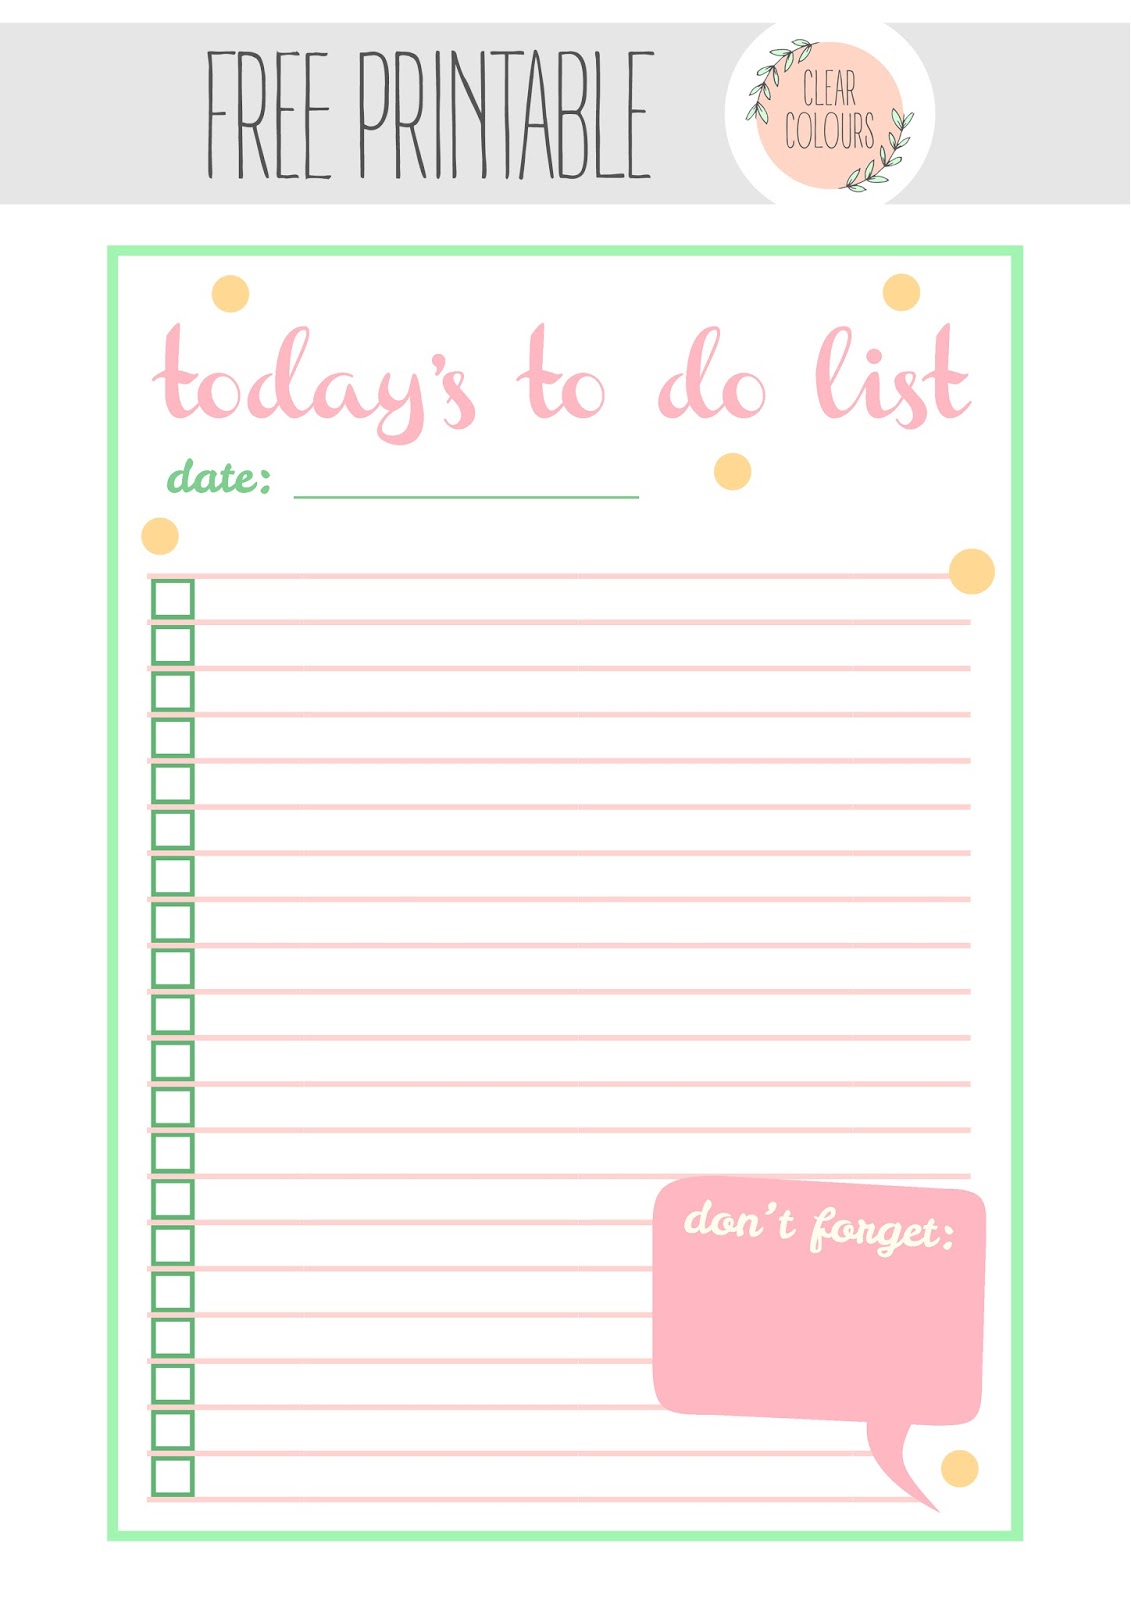 clear-colours-free-printables-to-do-list